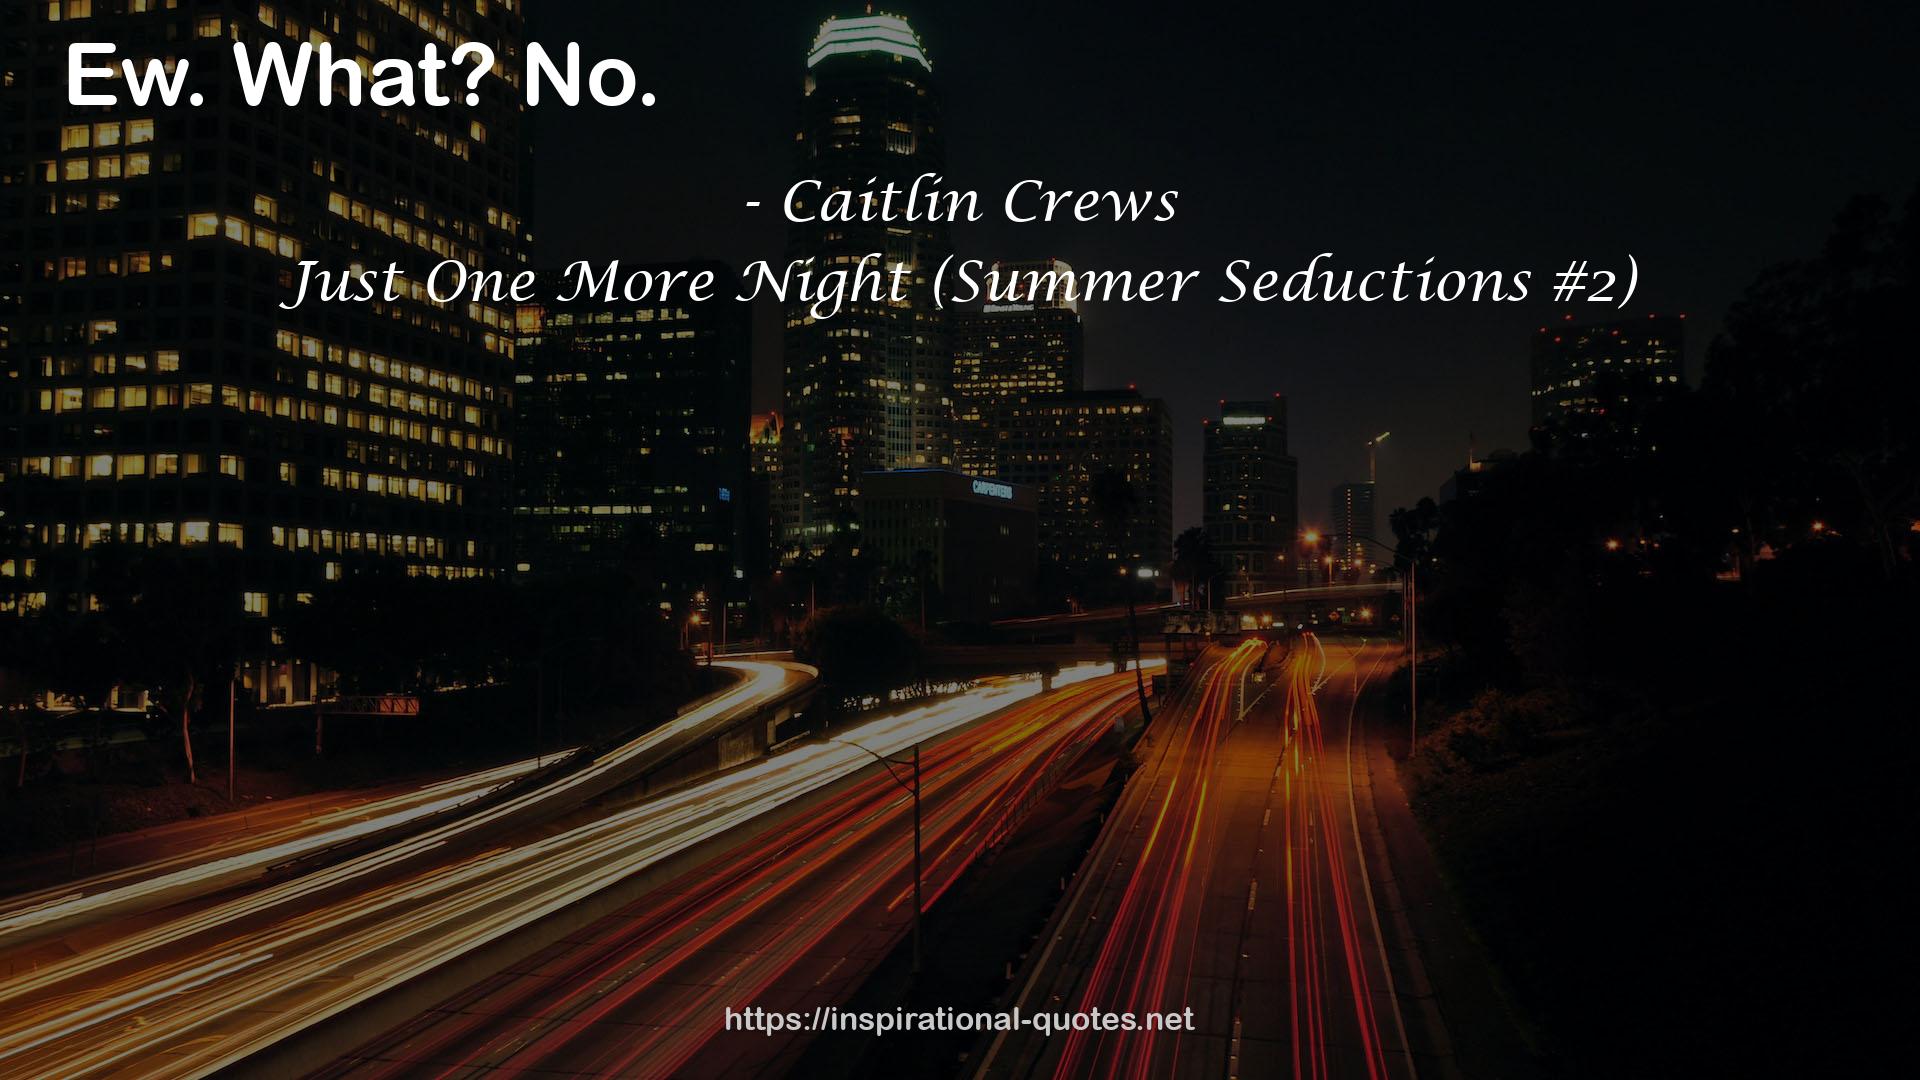 Just One More Night (Summer Seductions #2) QUOTES